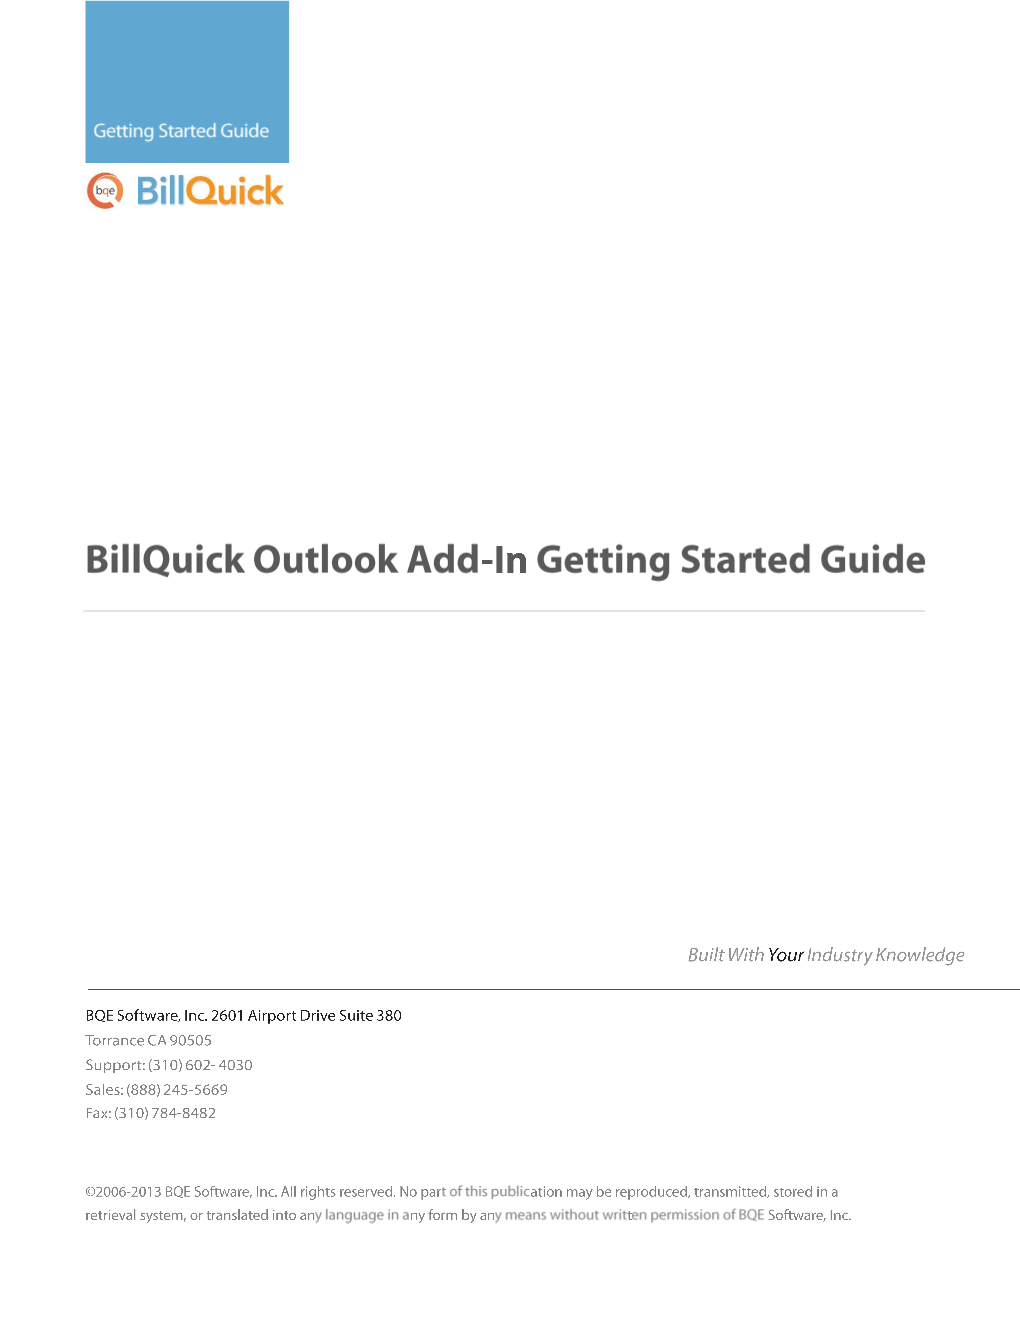 Billquick Outlook Addin Getting Started Guide 2013